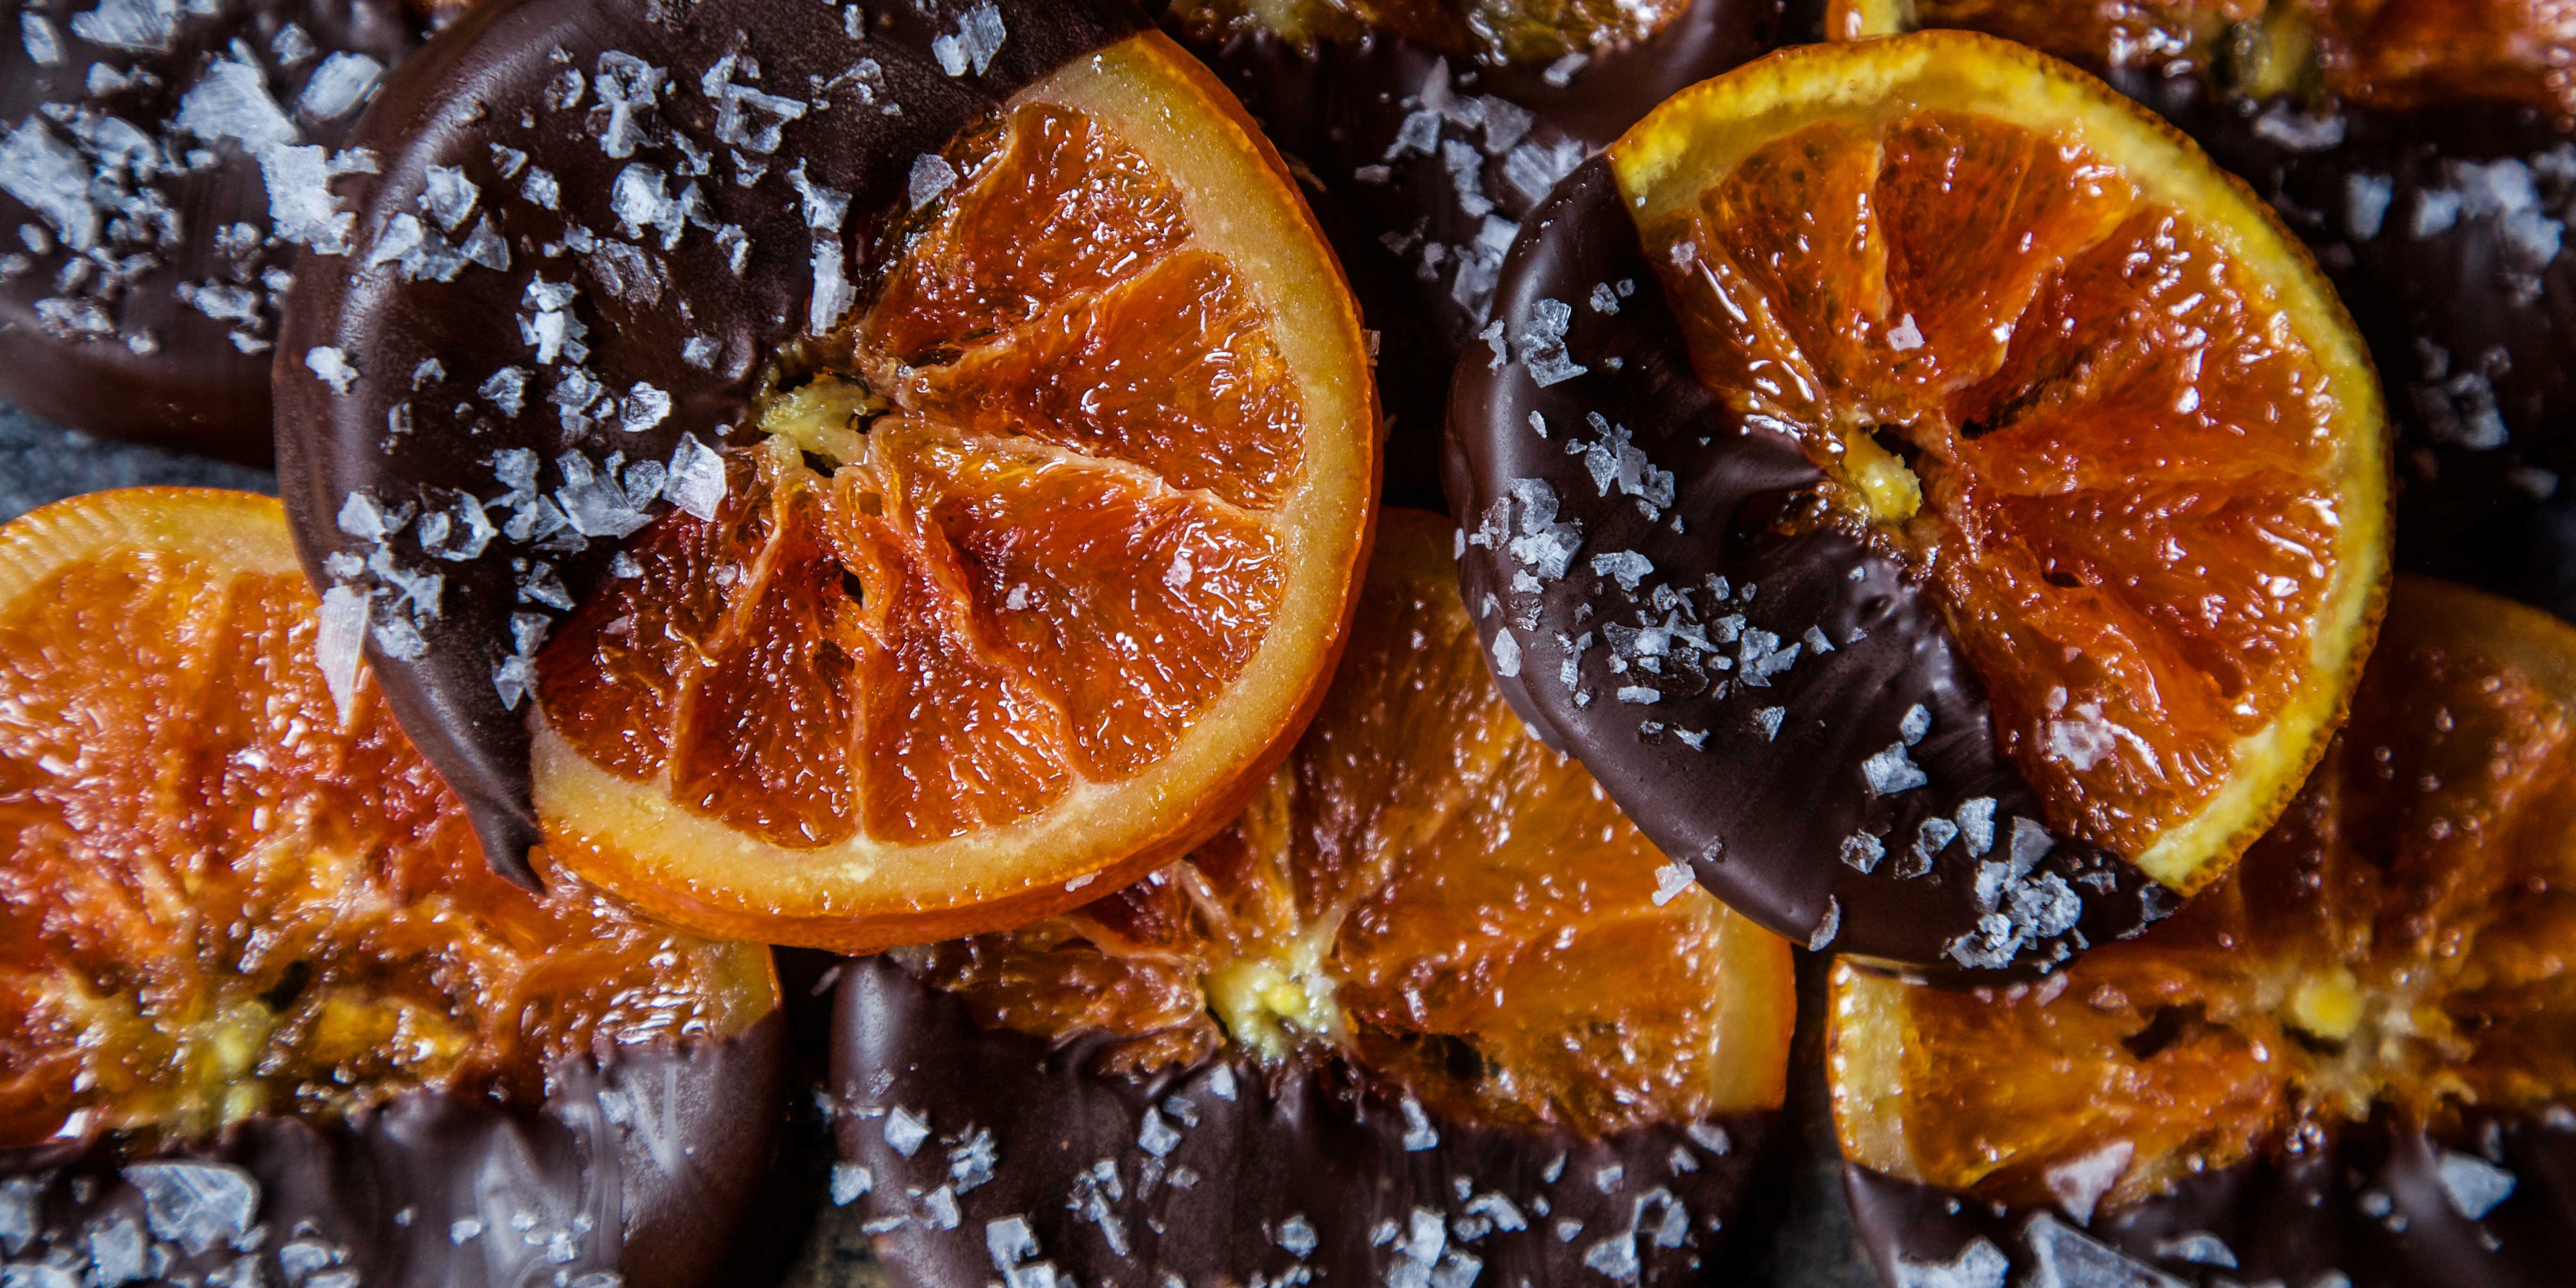 Candied Orange Slices With Dark Chocolate Recipe Harry And David